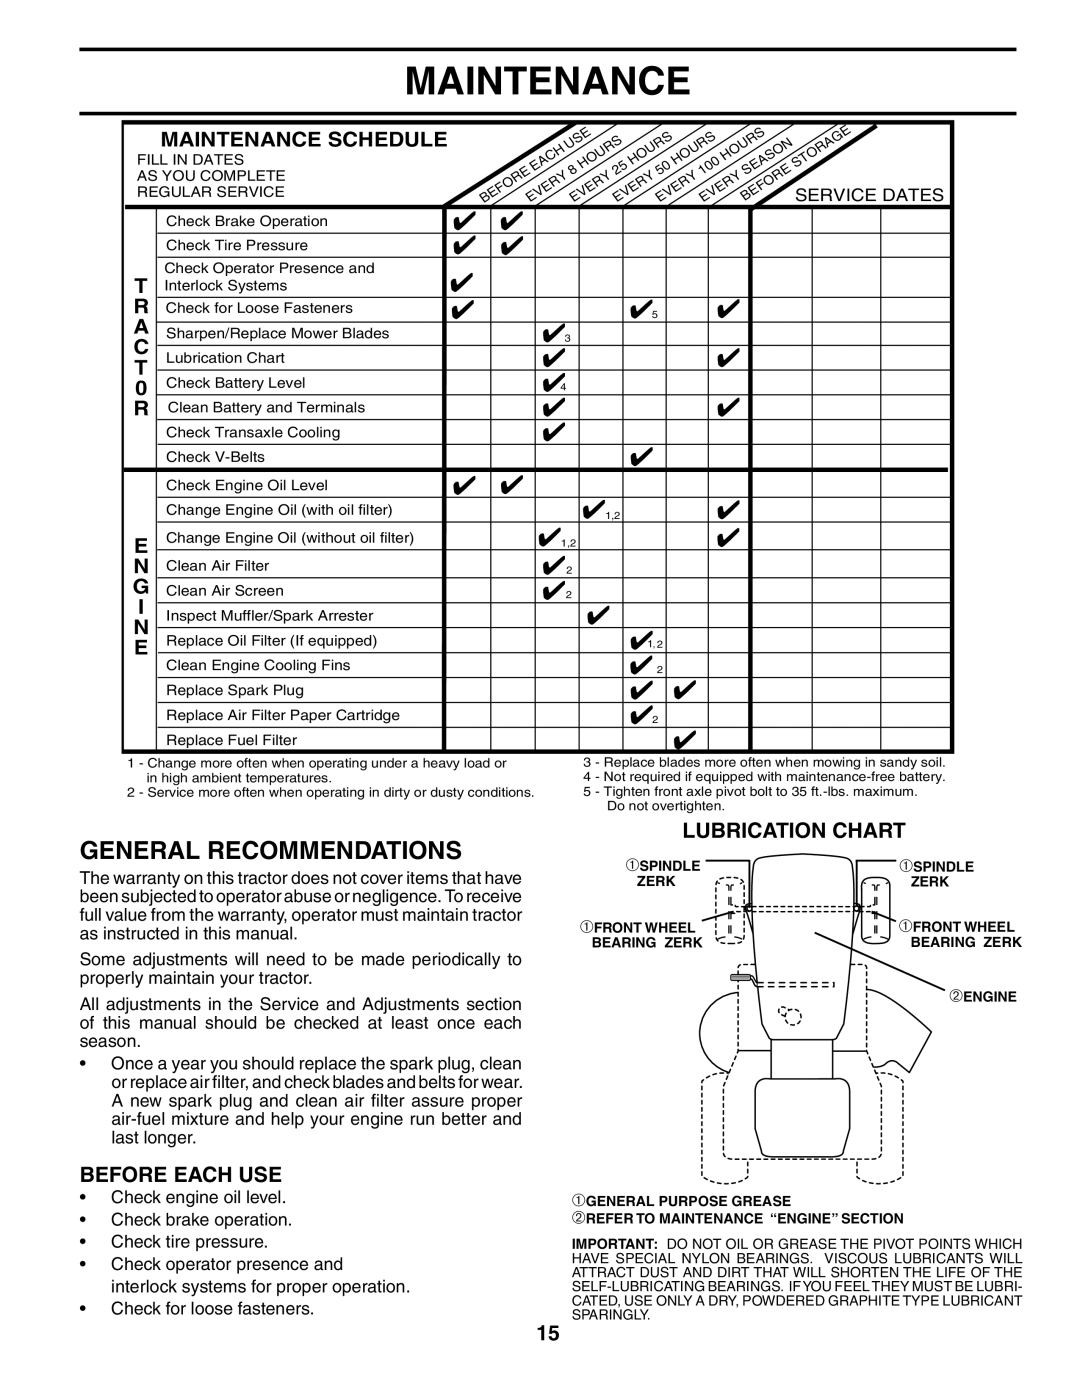 Husqvarna YTH1842 owner manual General Recommendations, Lubrication Chart, Before Each Use, Maintenance Schedule 